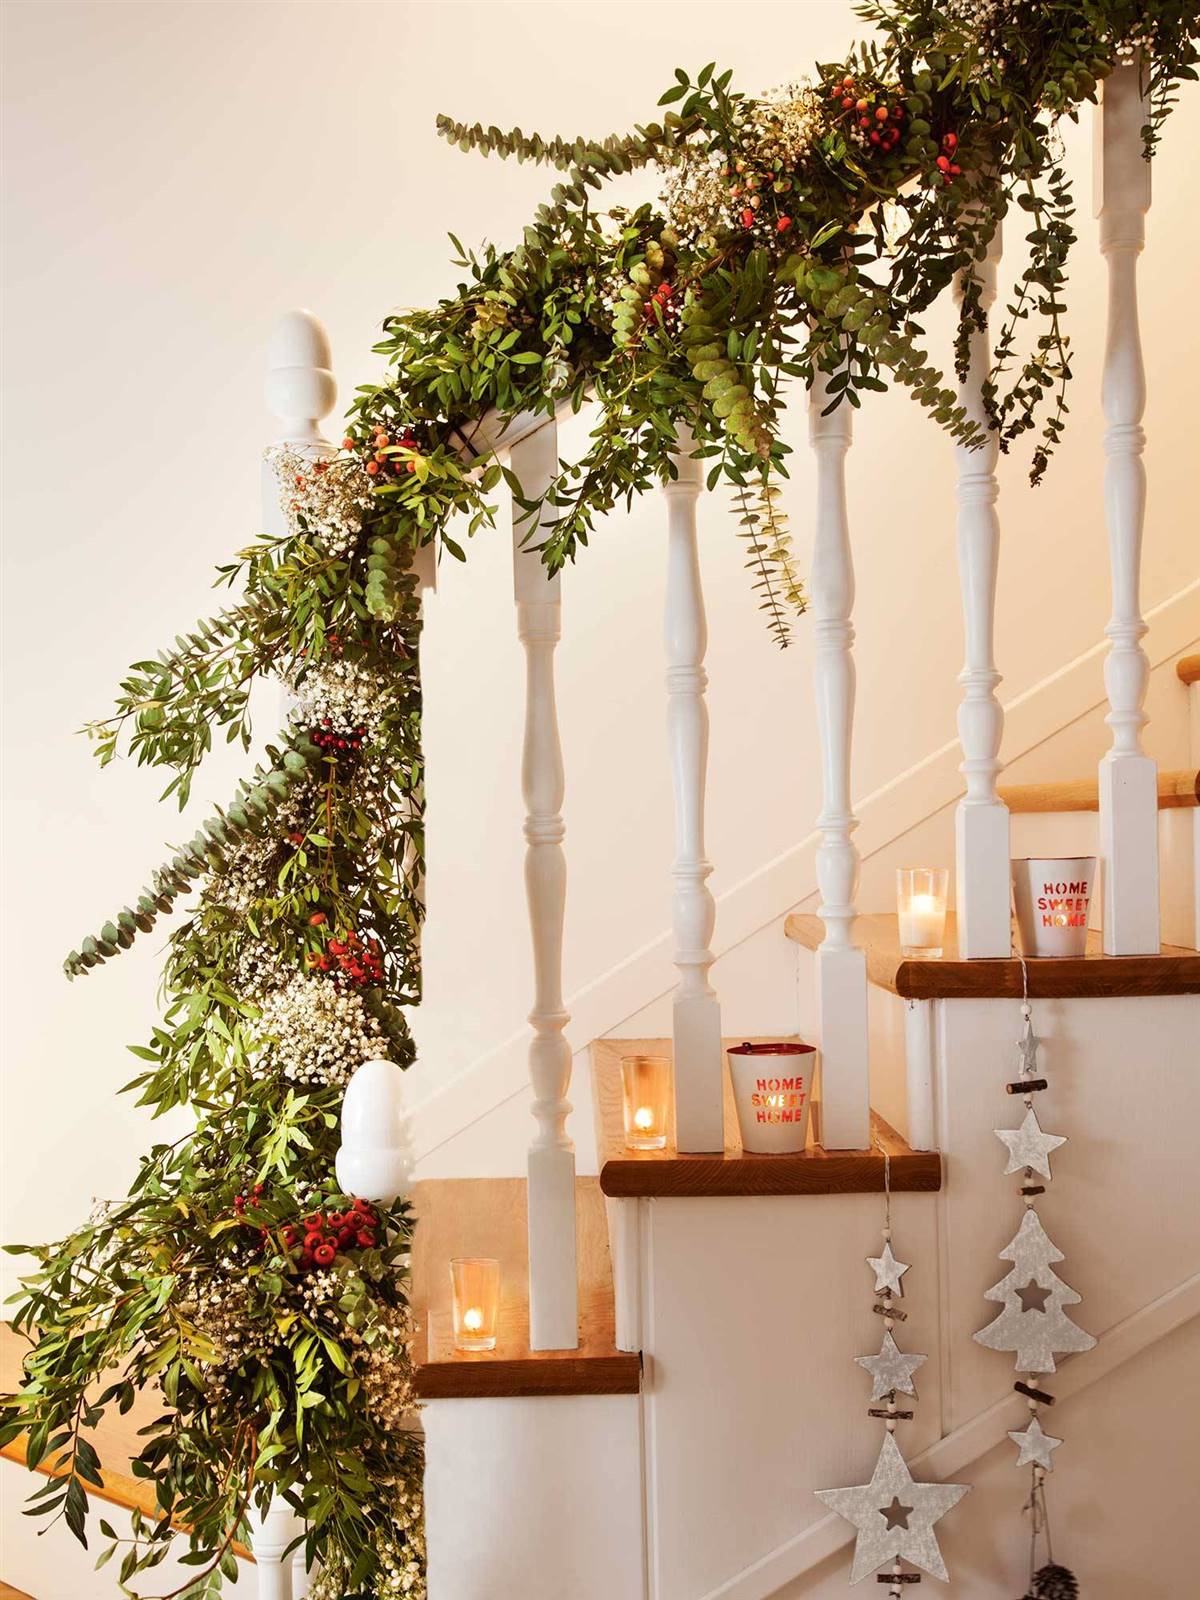 DECORATE THE STAIRCASE WITH A GREEN GARLAND